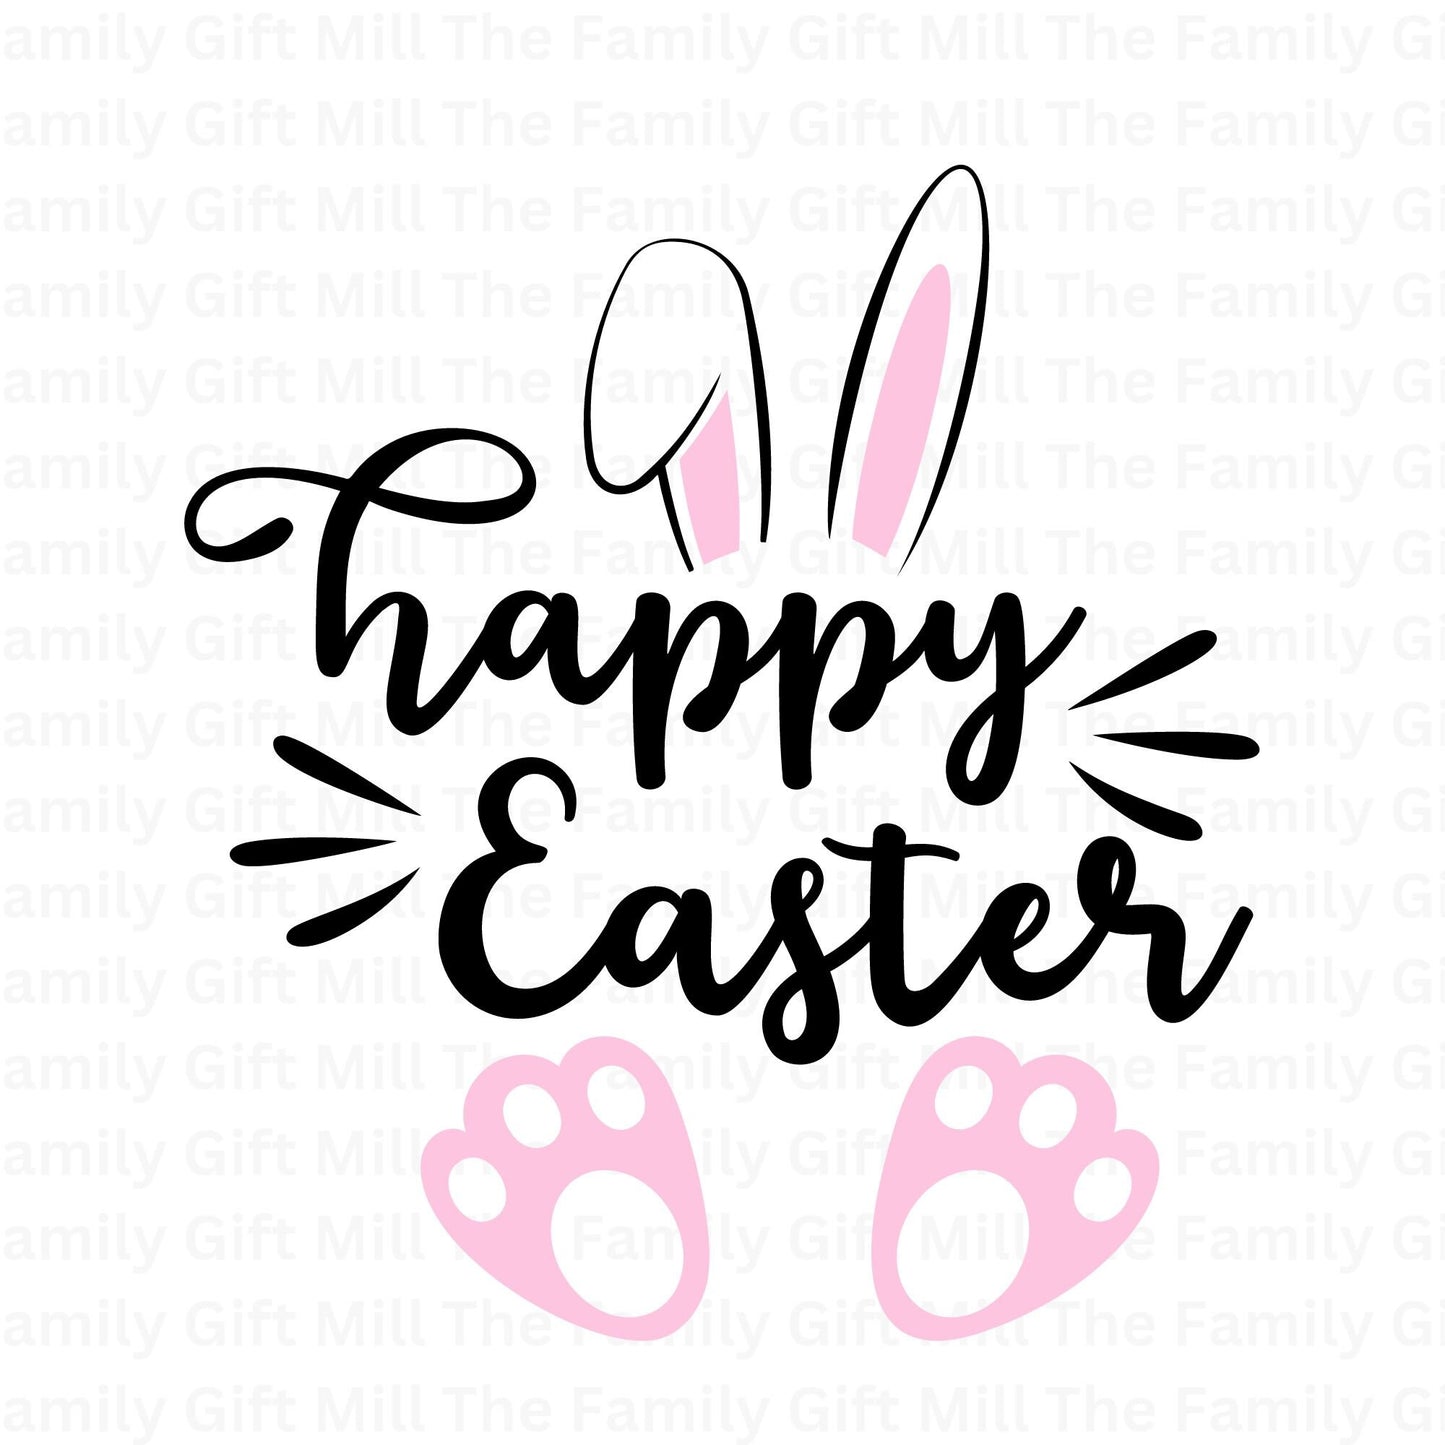 Get Ready for Easter - Easter Bunny and Bunny Ears Instant Digital Download with svg, png, and jpg Files!